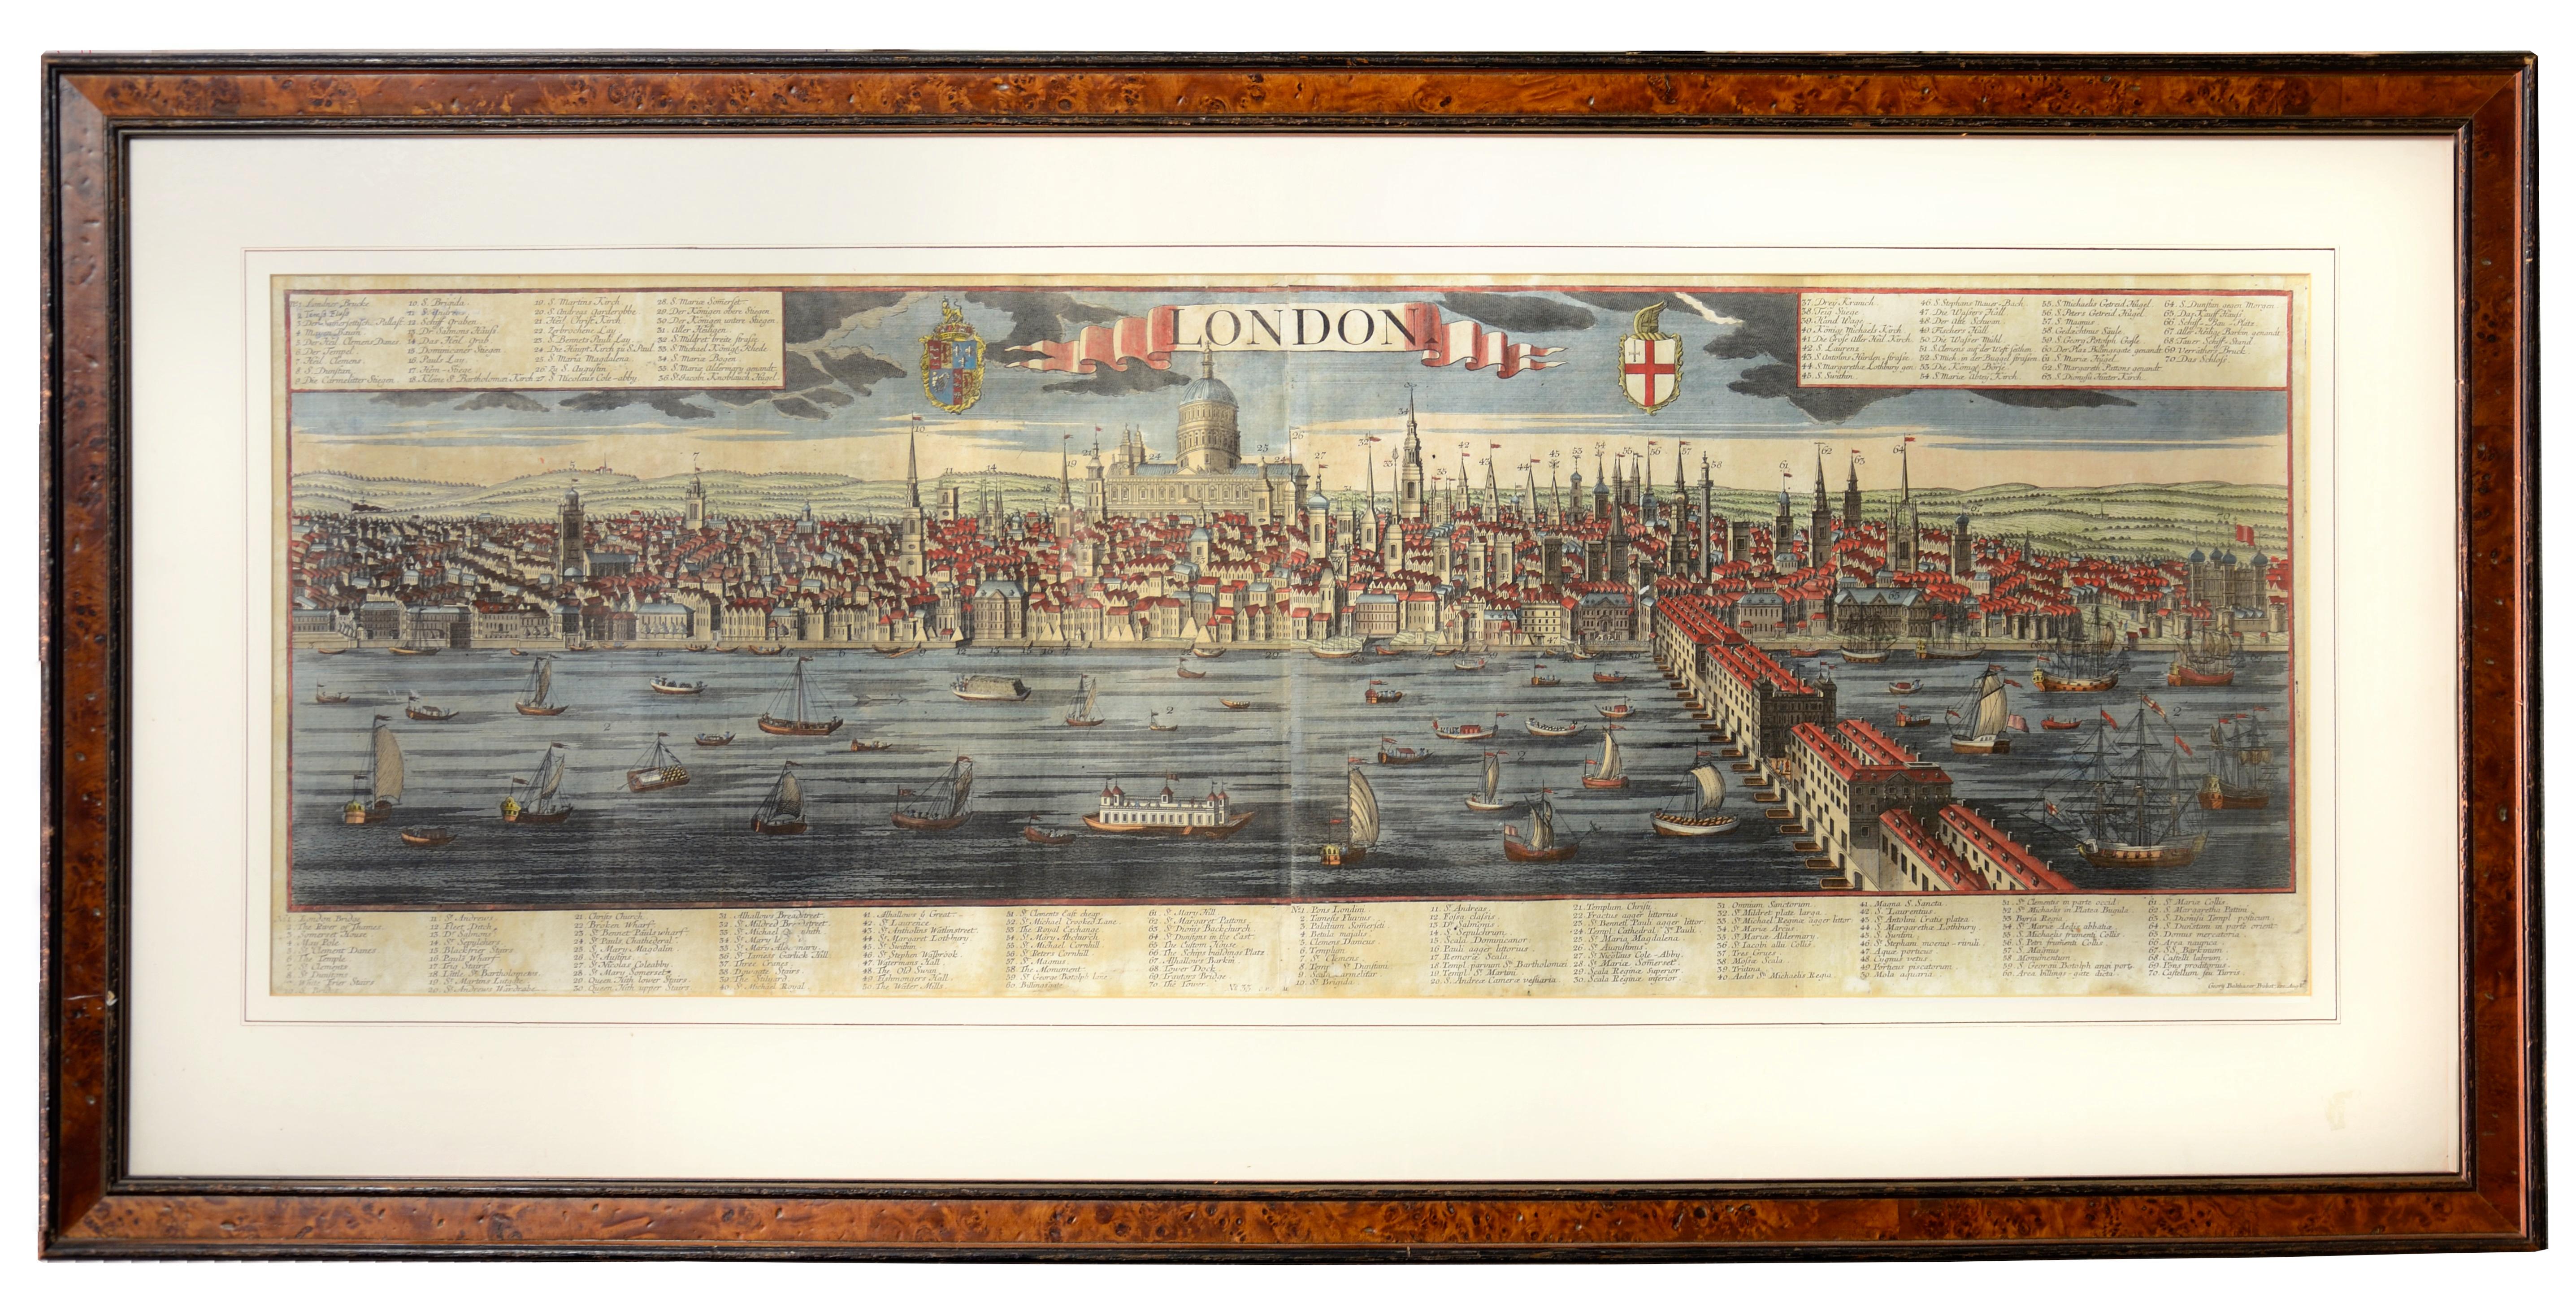 WERNER. A Panoramic View of London